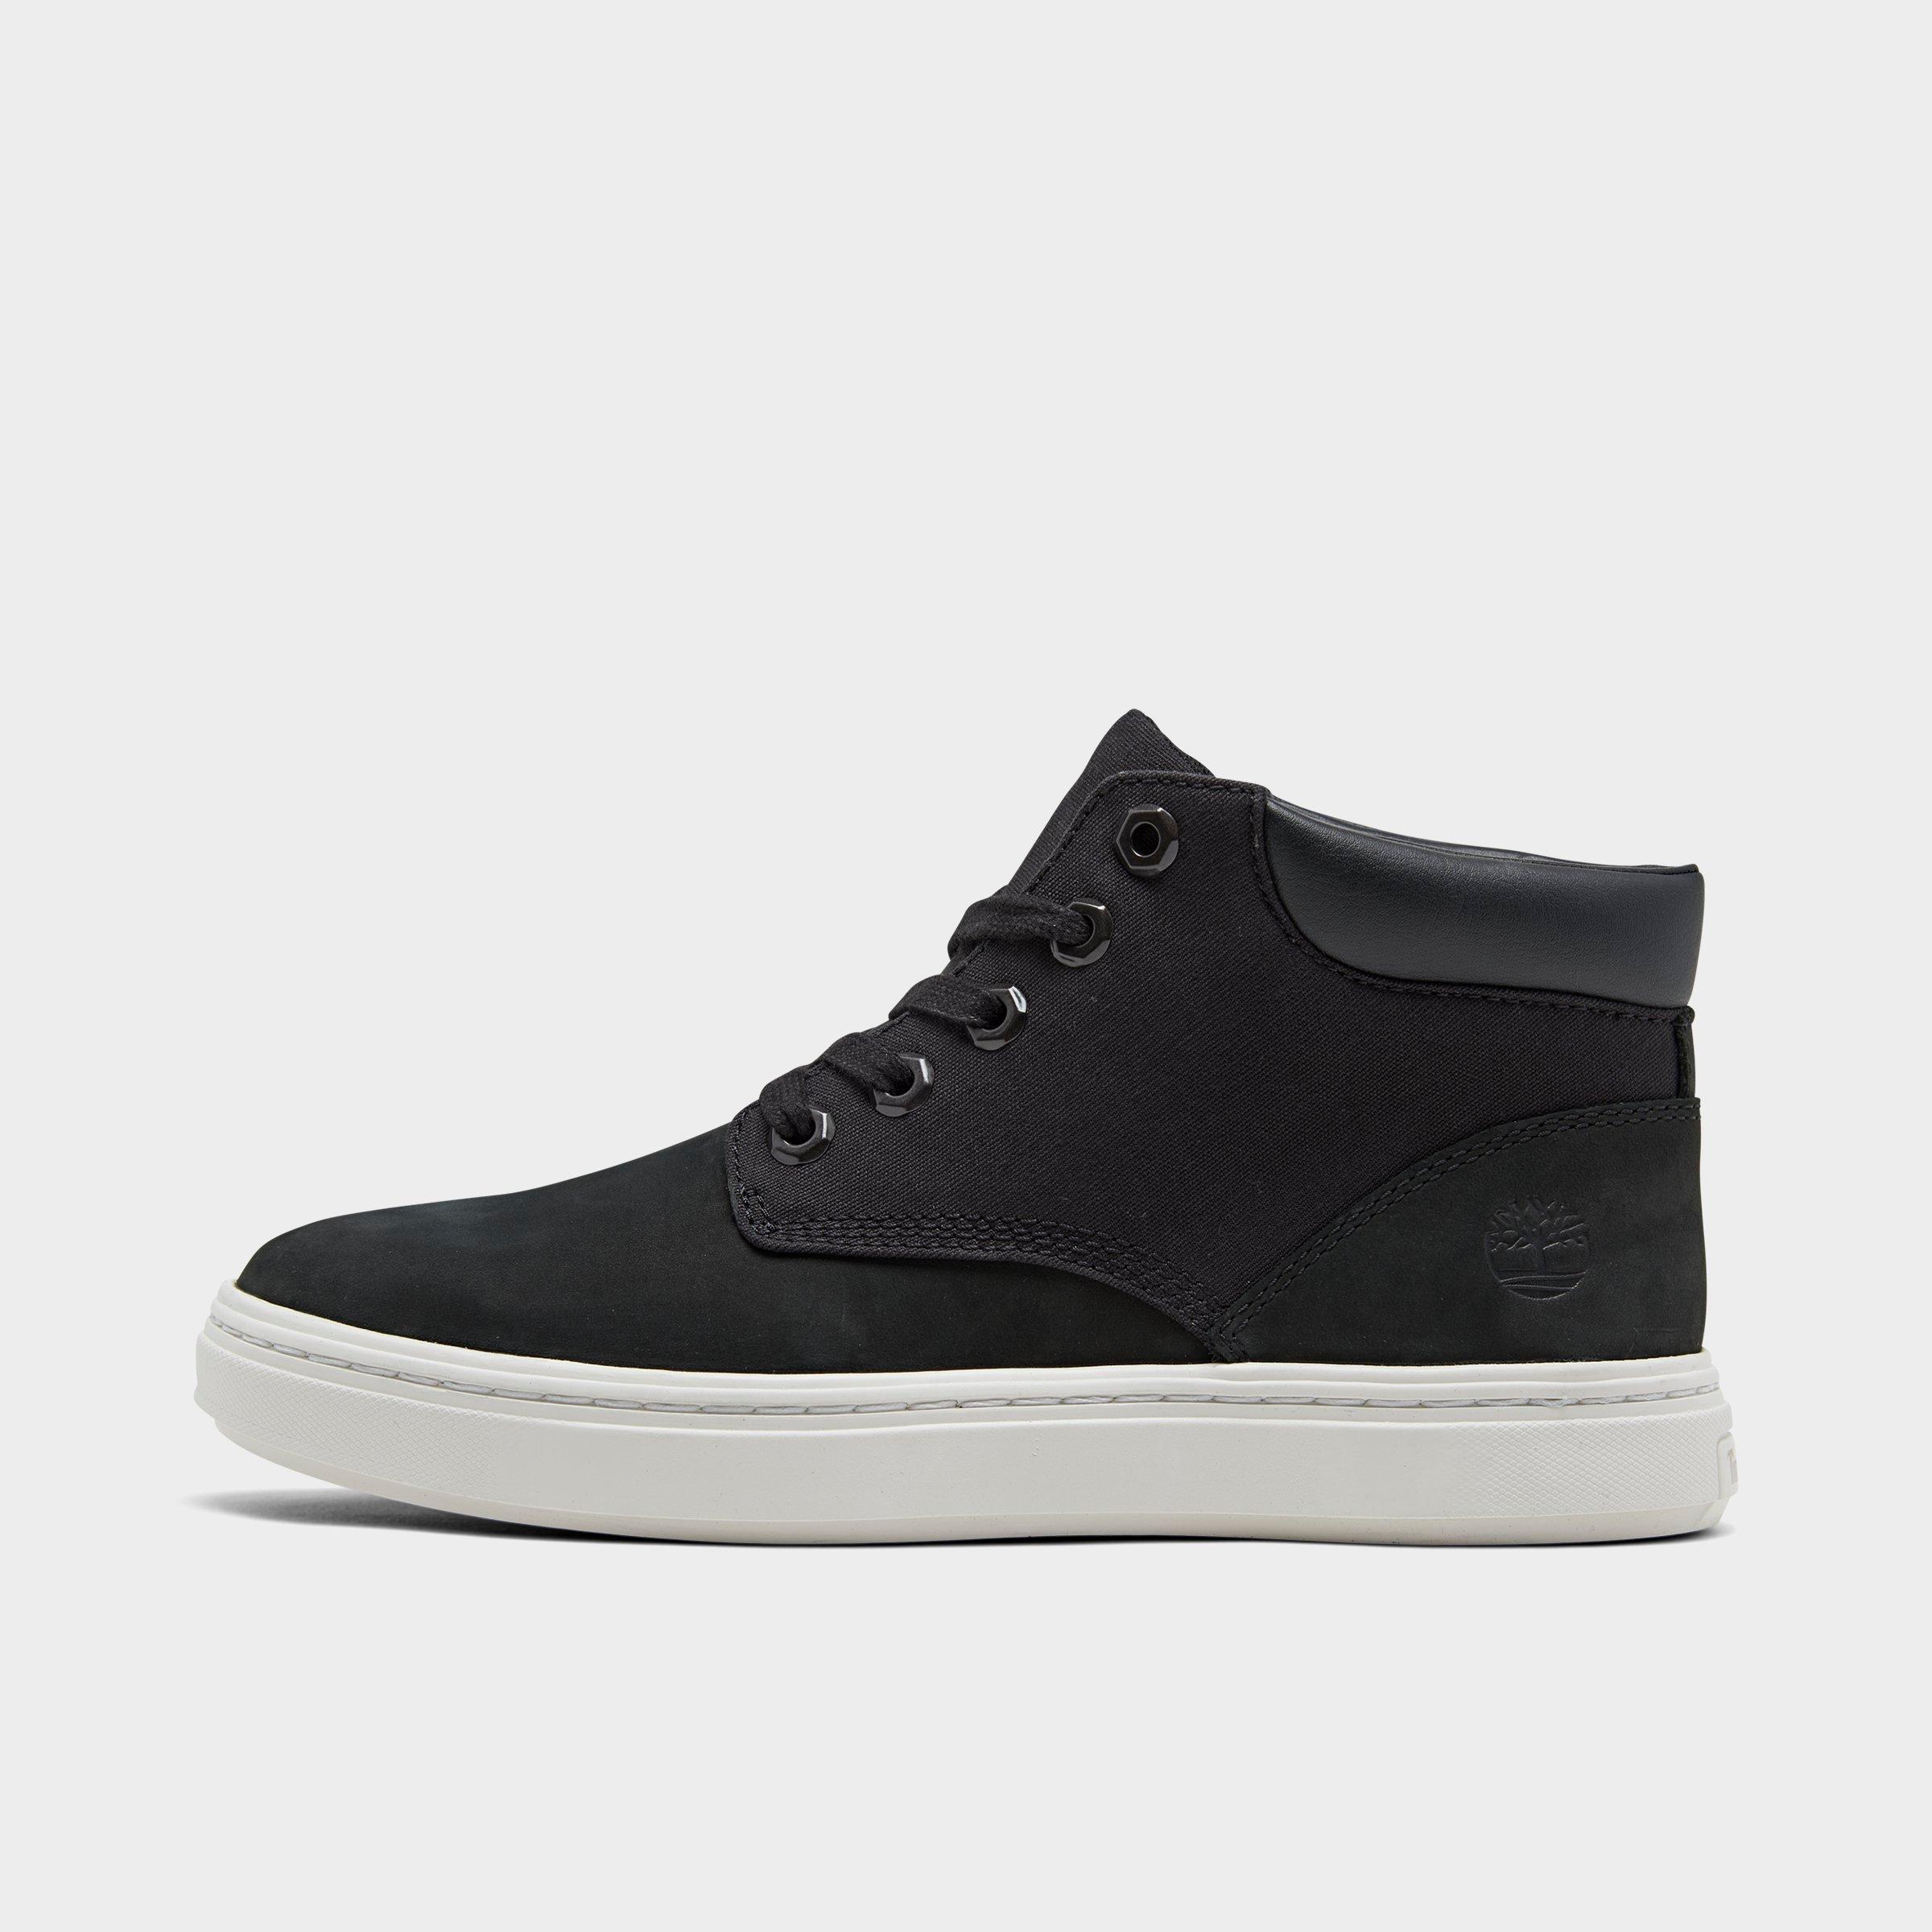 Timberland Bria High Top Casual Shoes 